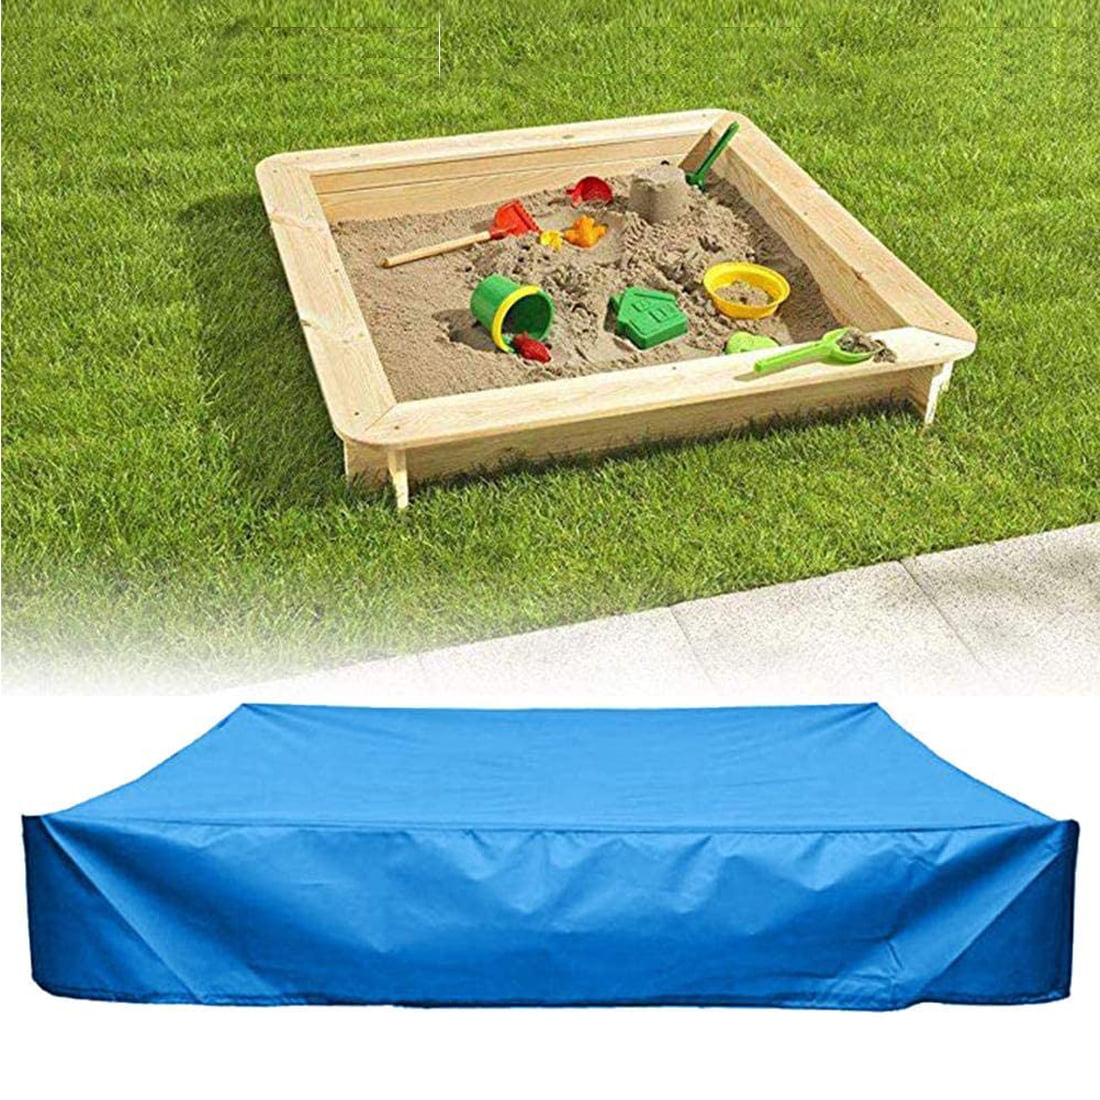 Oxford Cloth Sandbox Cover Pool Protective Cover for Sand Toys Adjustable Sandbox Cover with Drawstring Sandbox Cover 120120 cm, Black Waterproof Square Protective Cover 